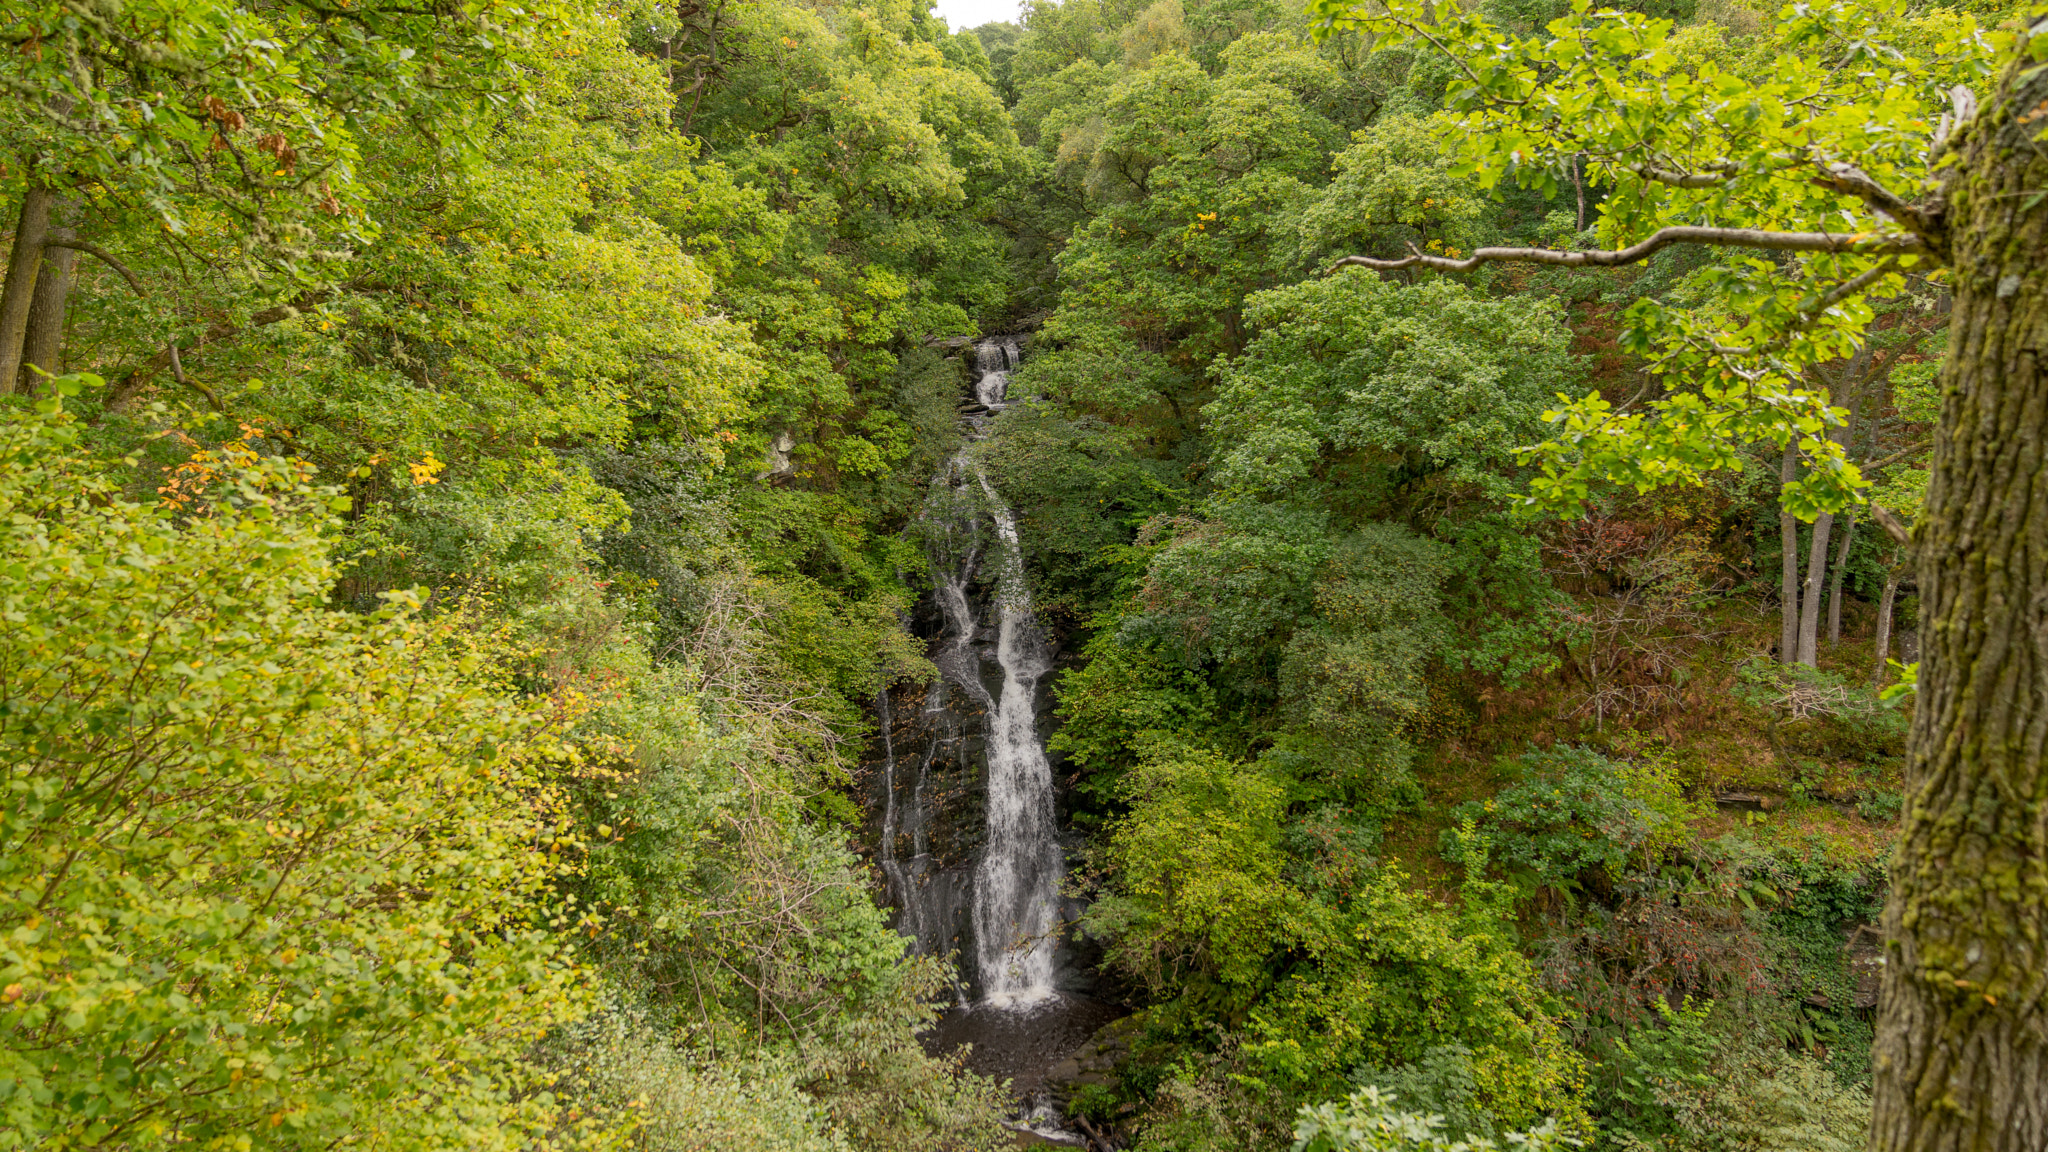 Sony a7 sample photo. Pitlochry black spout waterfall 1 photography